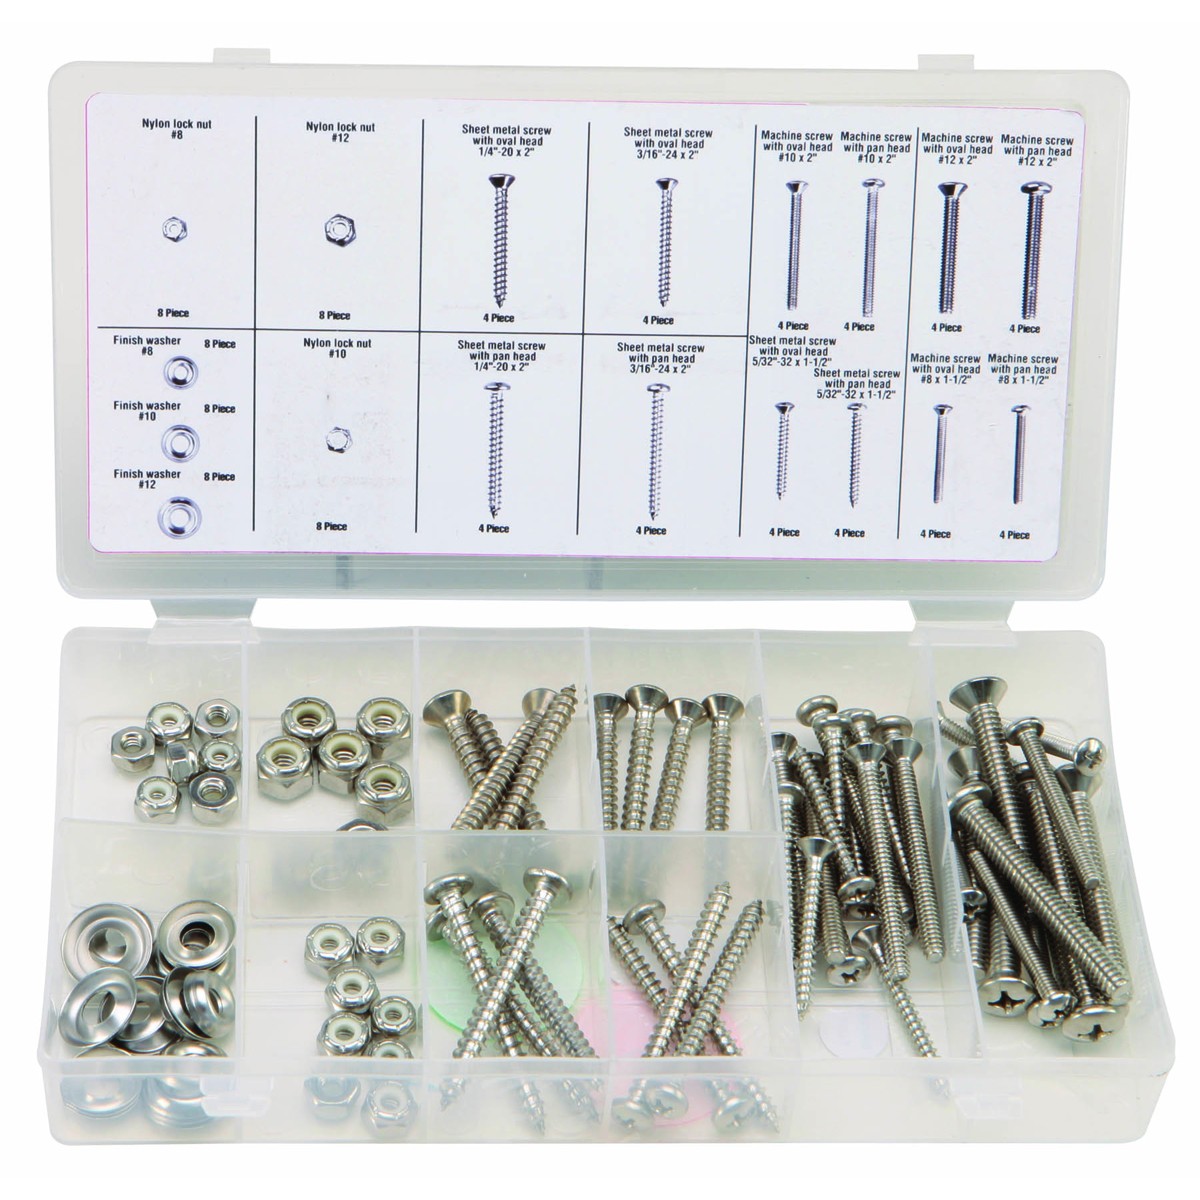 STOREHOUSE 96 Piece Stainless Steel Screw and Nut Set - Item 67680